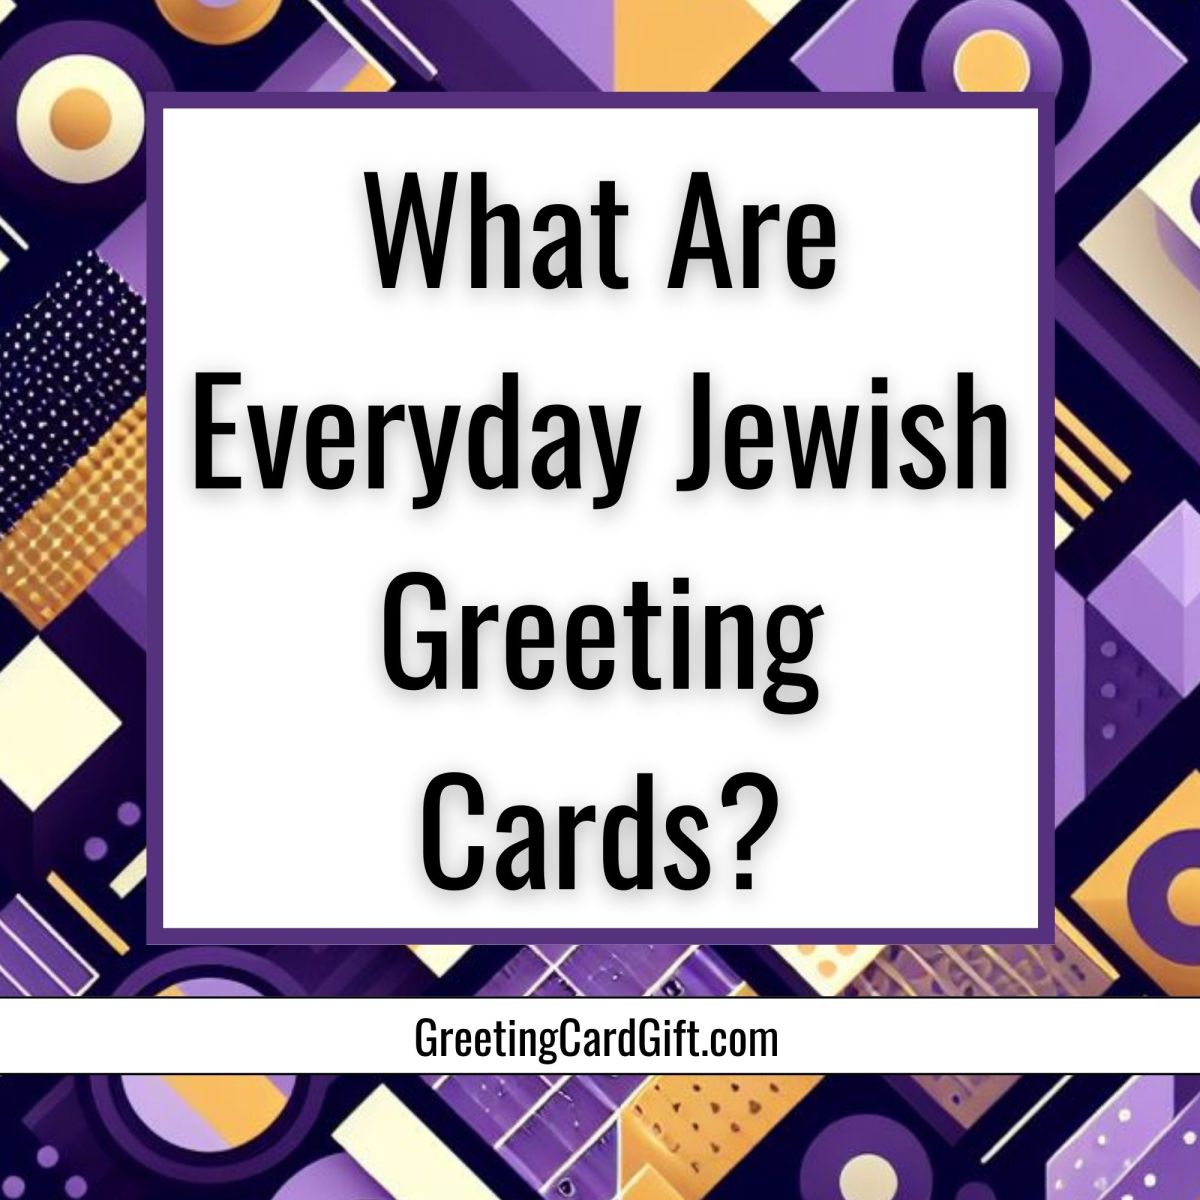 What Are Everyday Jewish Greeting Cards?